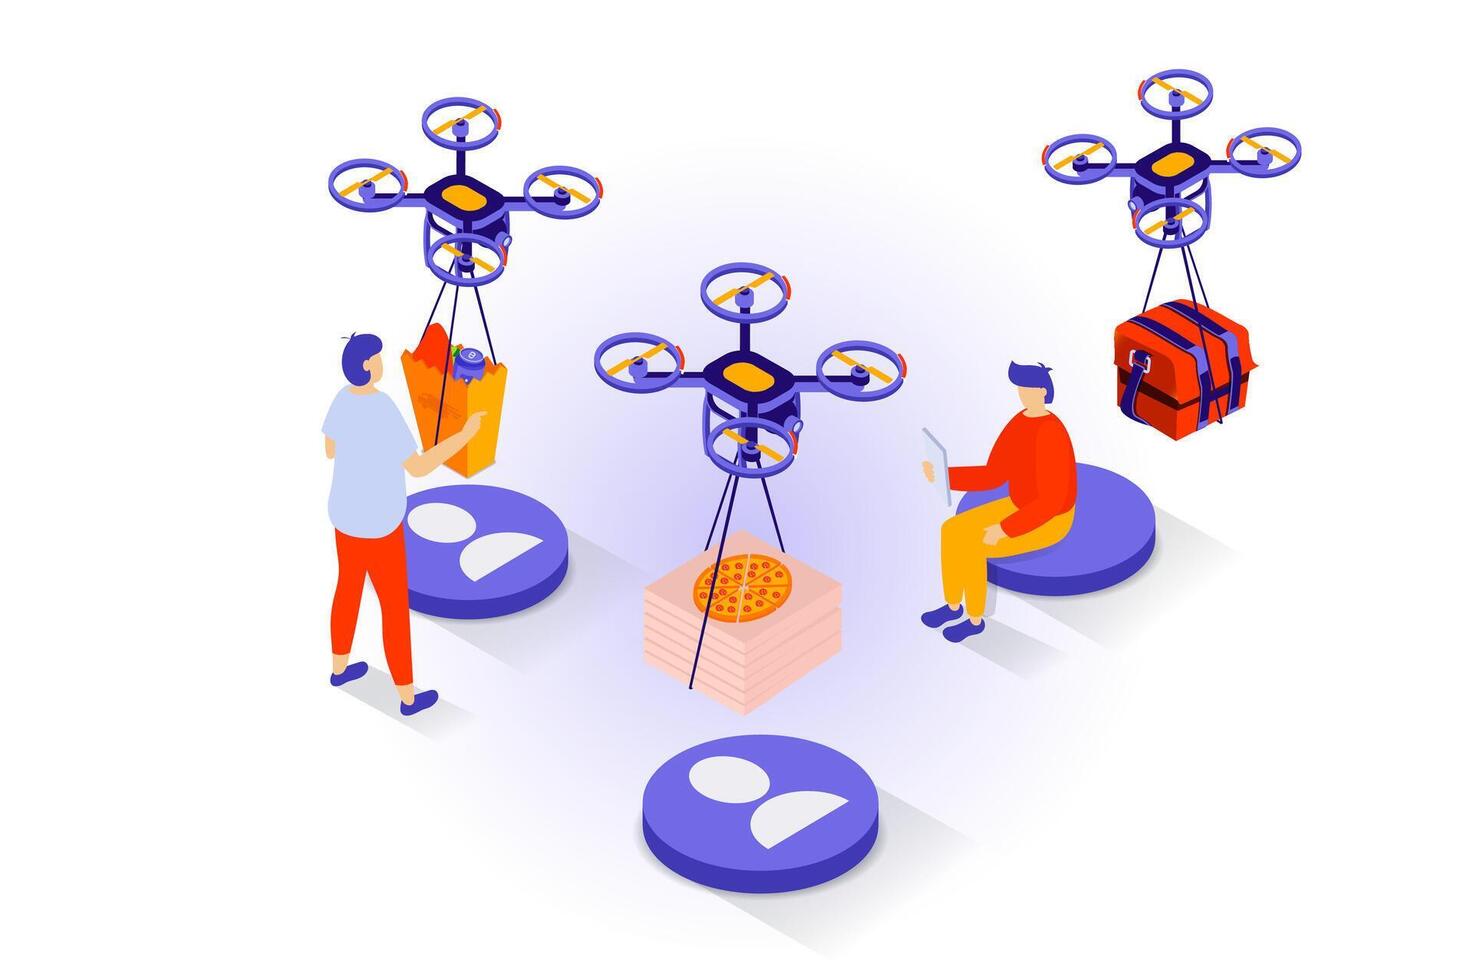 Food delivery concept in 3d isometric design. People ordering products bags and pizza from restaurant and receiving parcels from flying drones. Vector illustration with isometry scene for web graphic